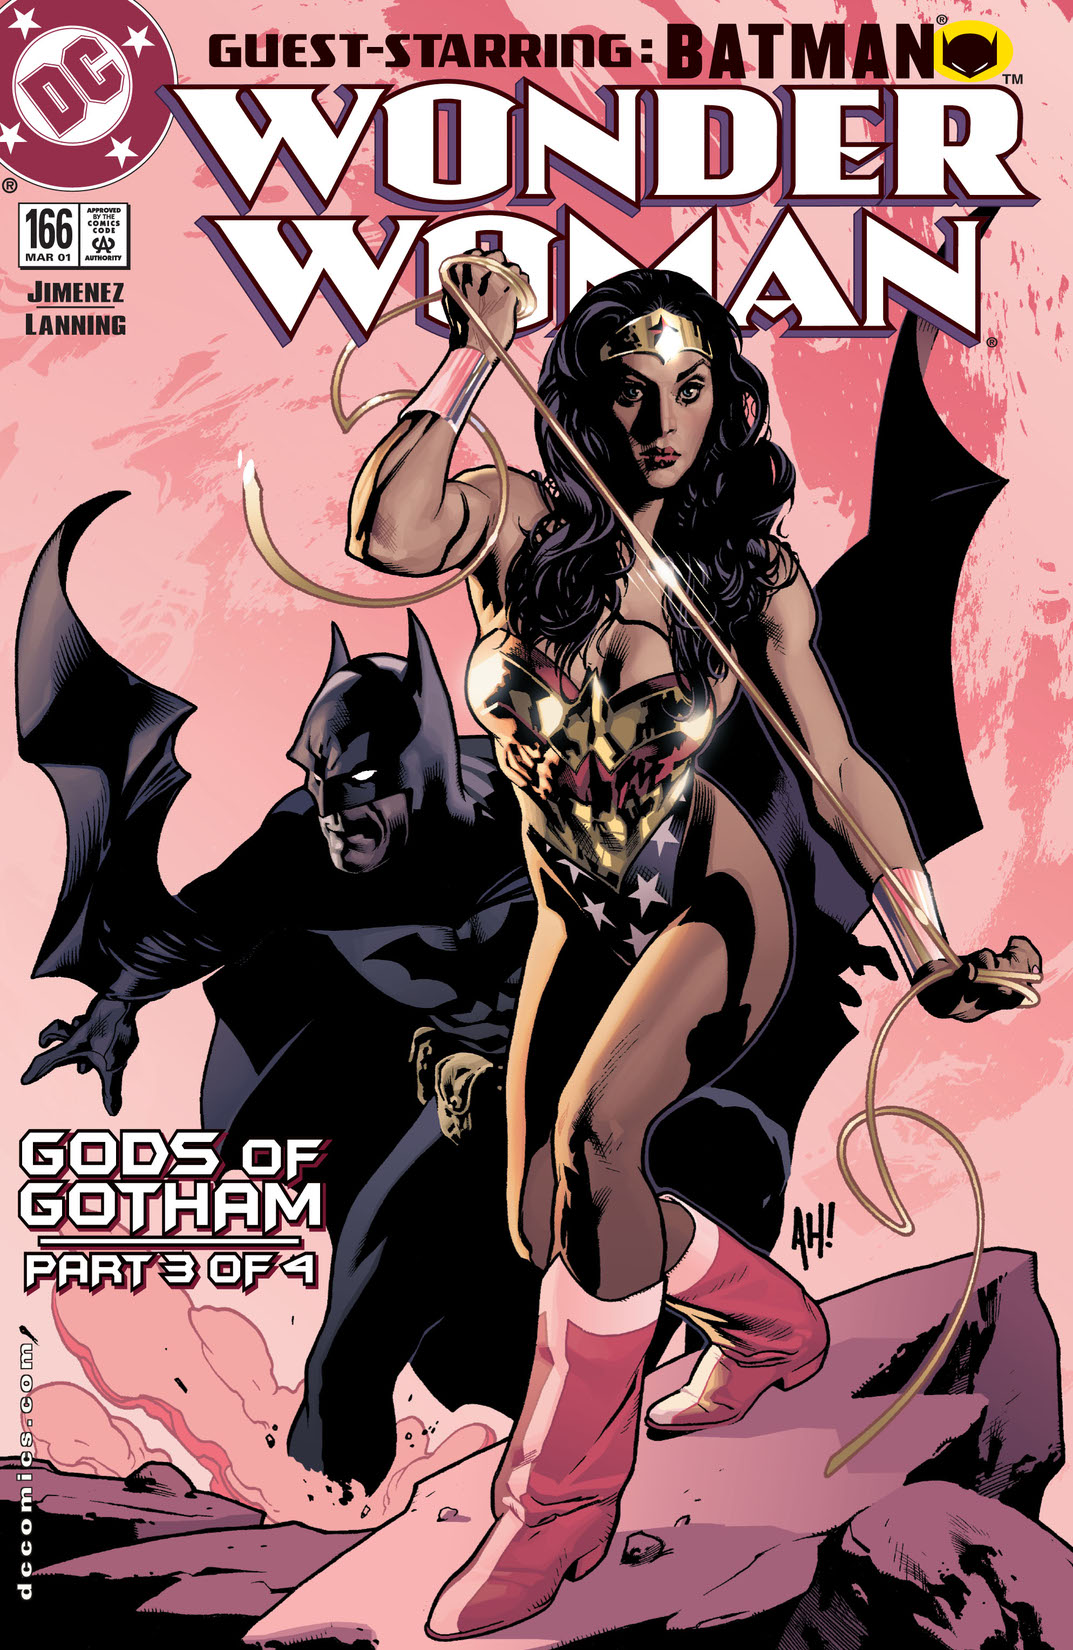 Wonder Woman (1986-) #166 preview images